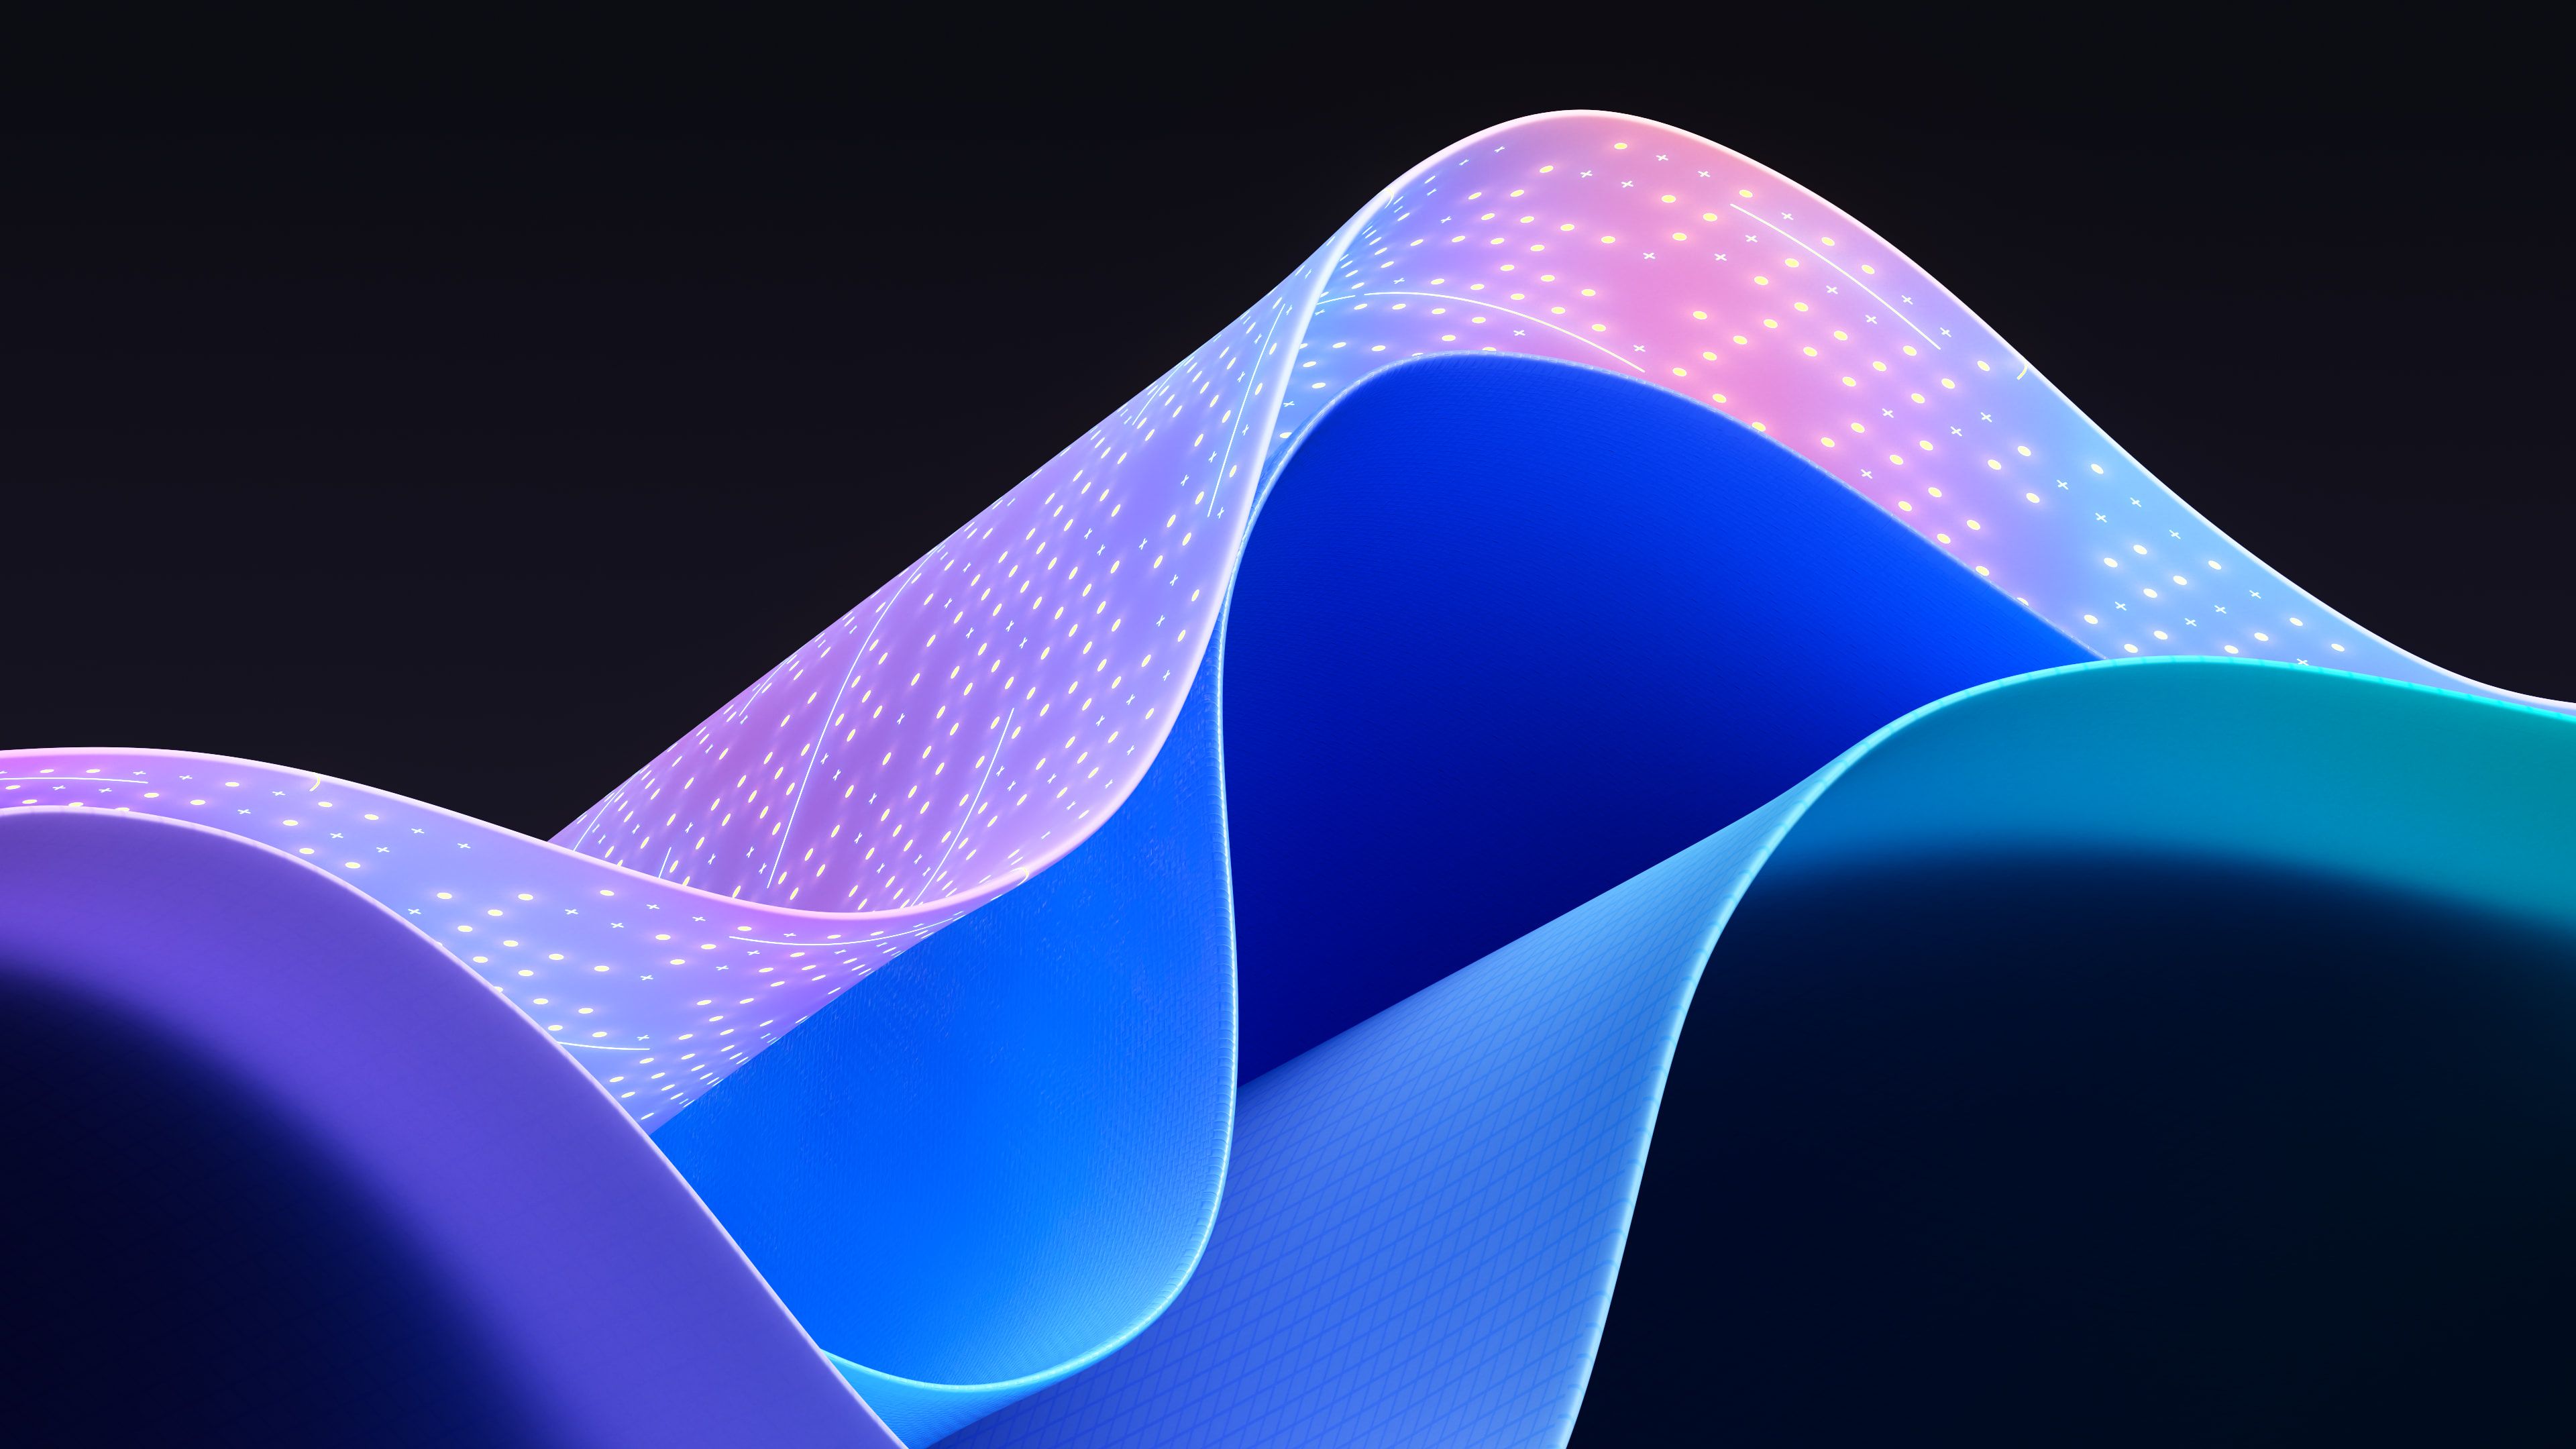 An abstract image of flowing, neon blue and pink waves. - Windows 11